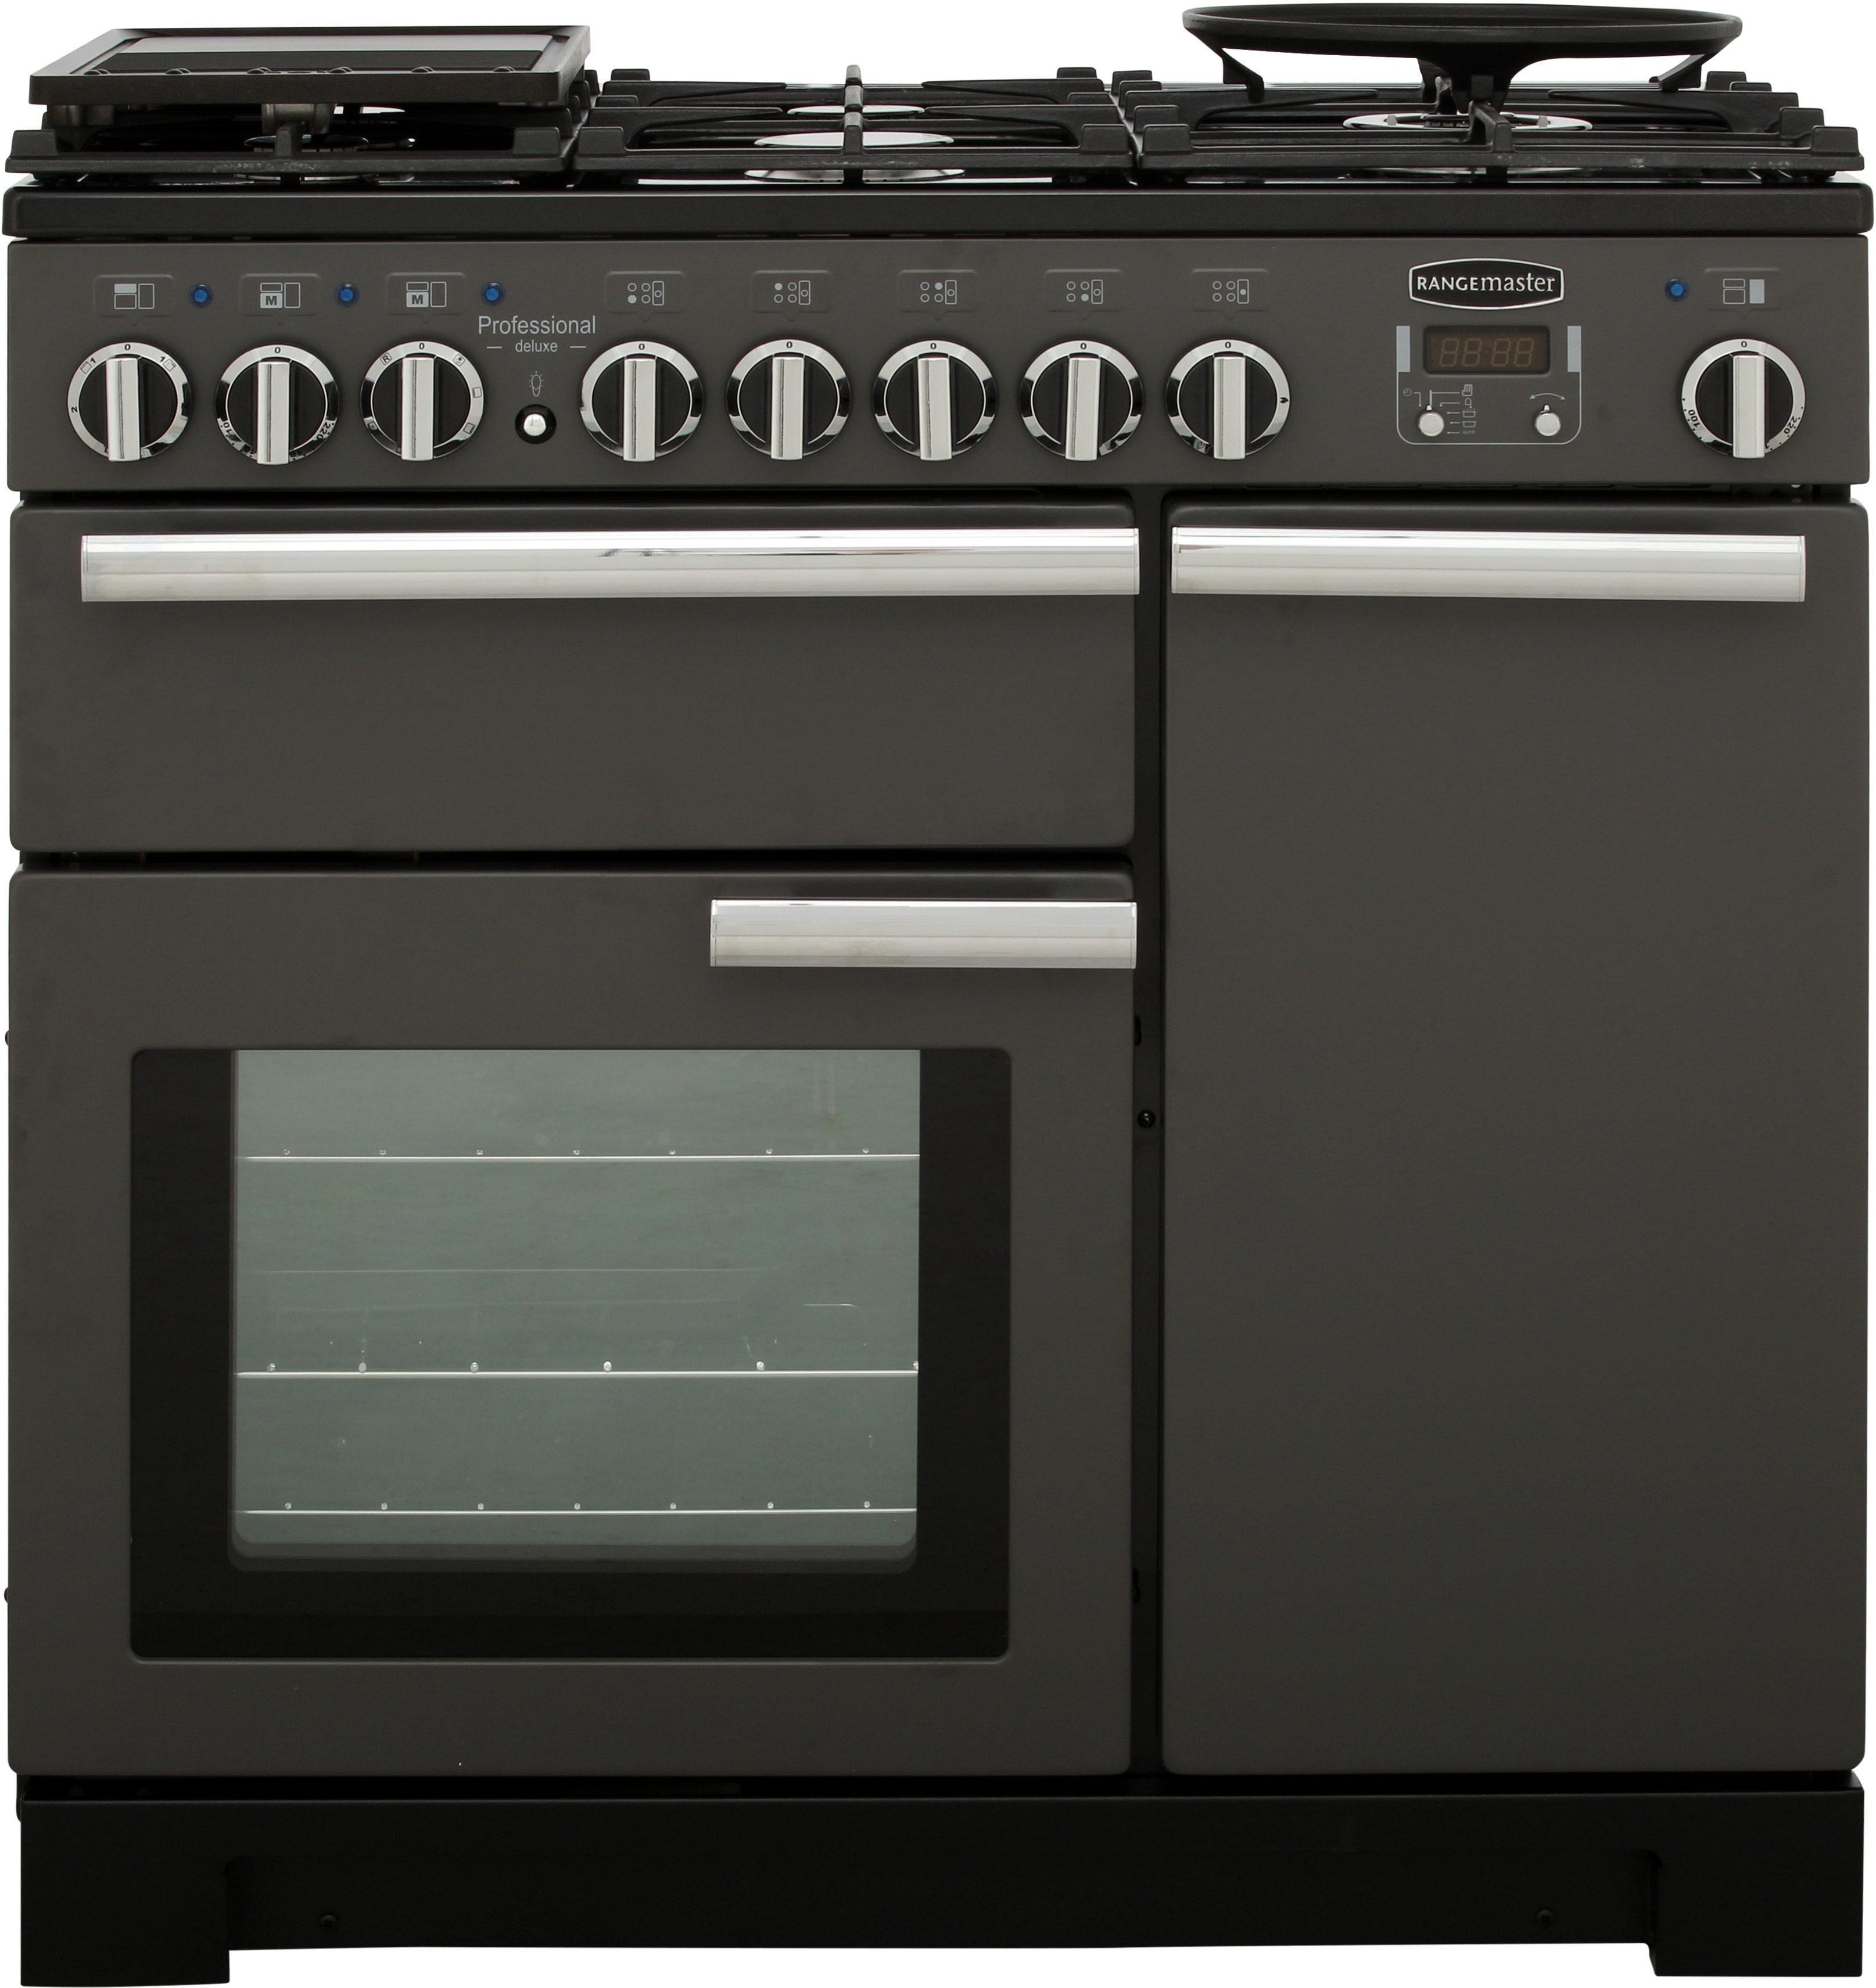 Rangemaster Professional Deluxe PDL90DFFSL/C 90cm Dual Fuel Range Cooker - Slate - A/A Rated, Graphite